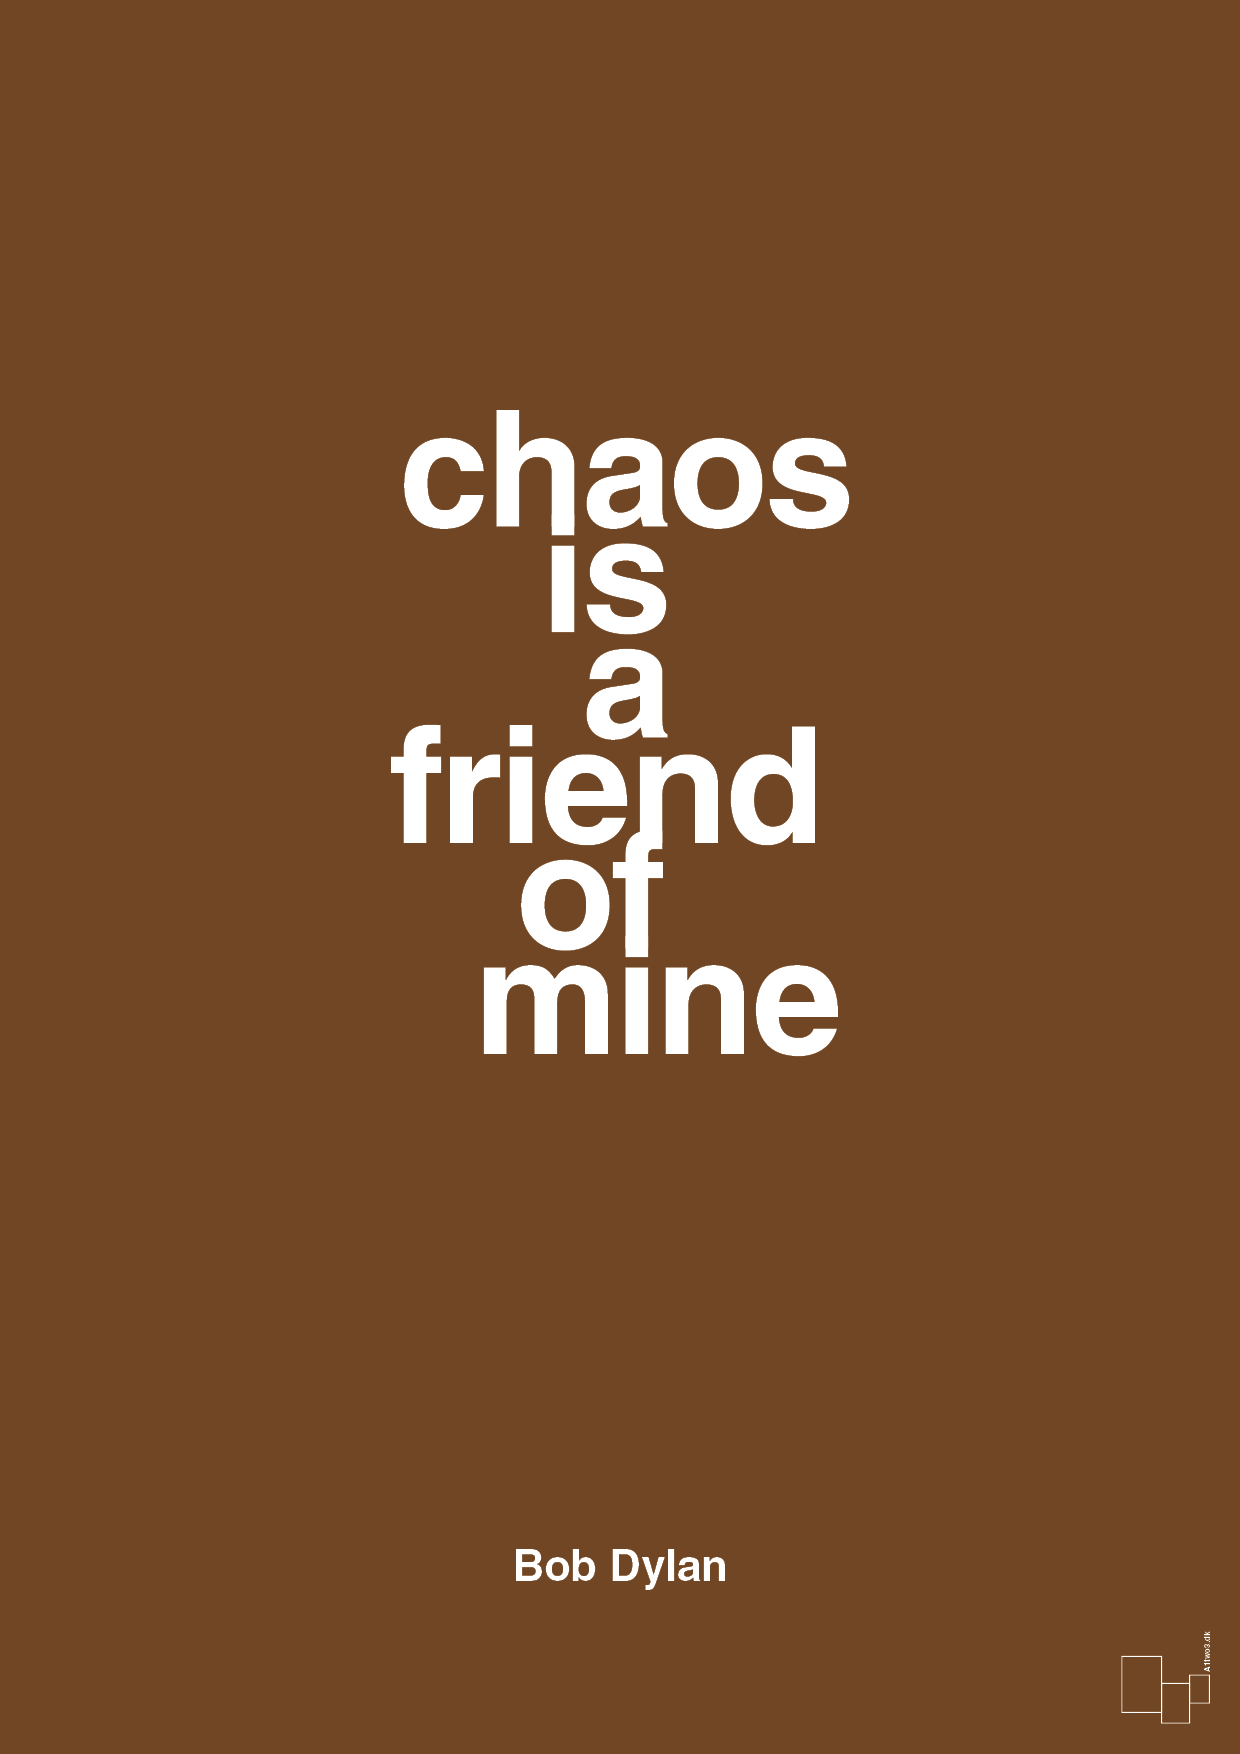 chaos is a friend of mine - Plakat med Citater i Dark Brown